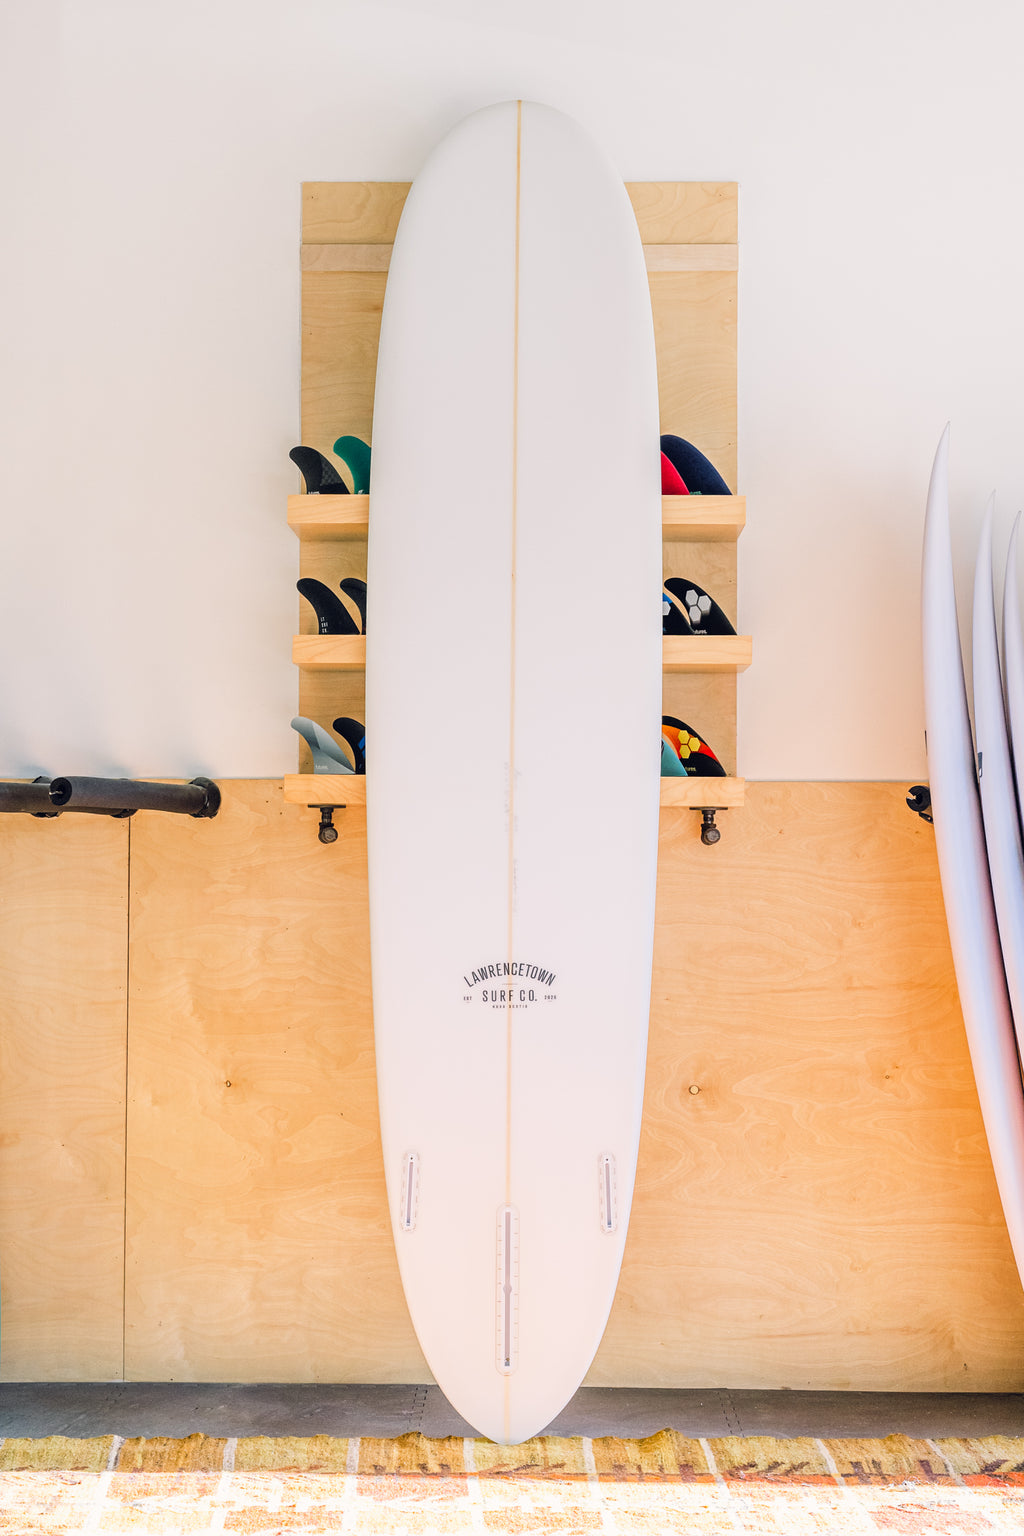 Lawrencetown Surf Co. Round Pin Longboard - 8'4"